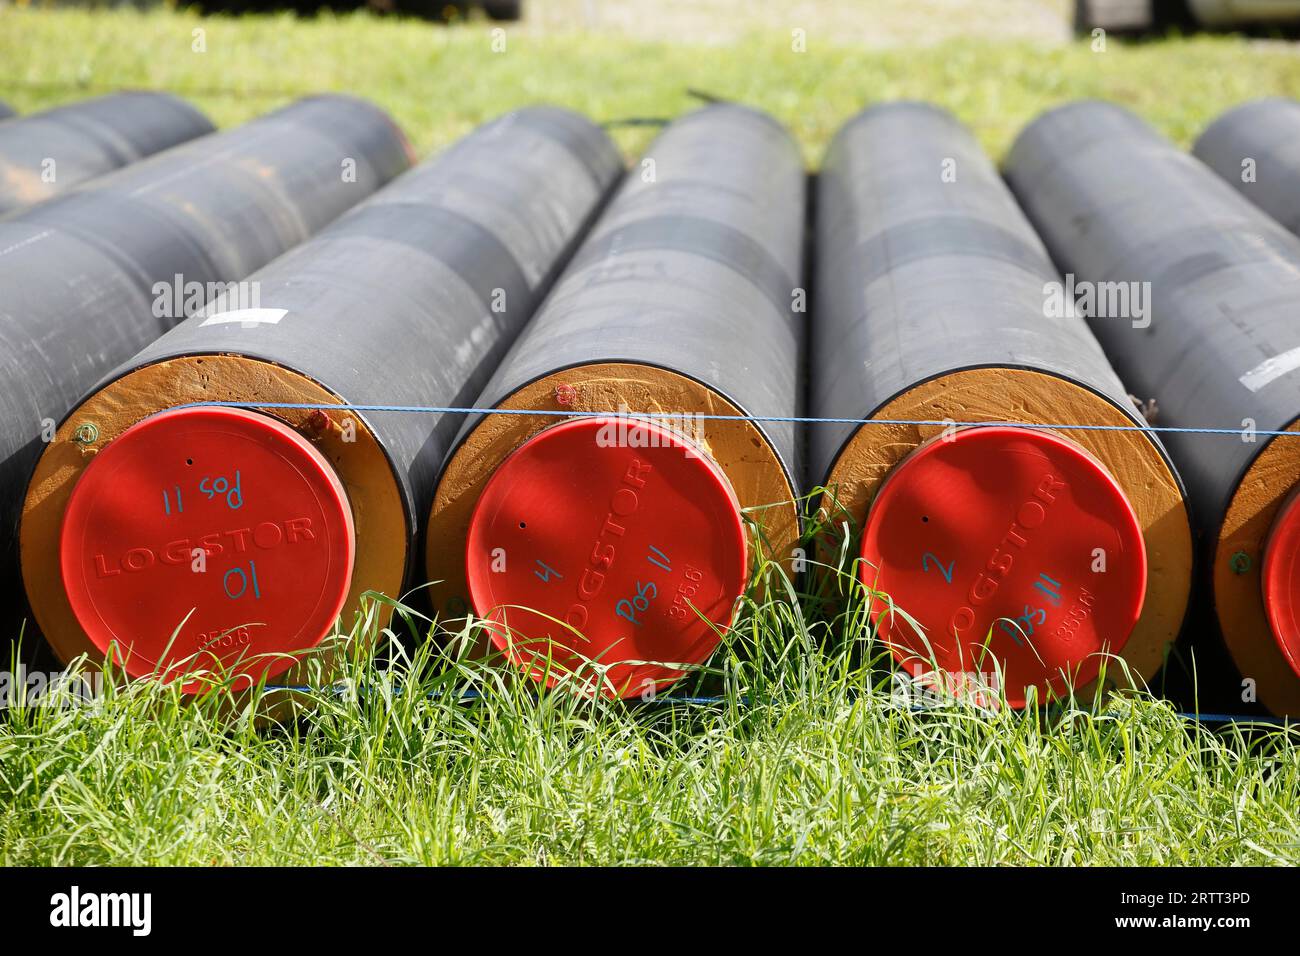 Pipes for district heating, energy transition, Germany Stock Photo